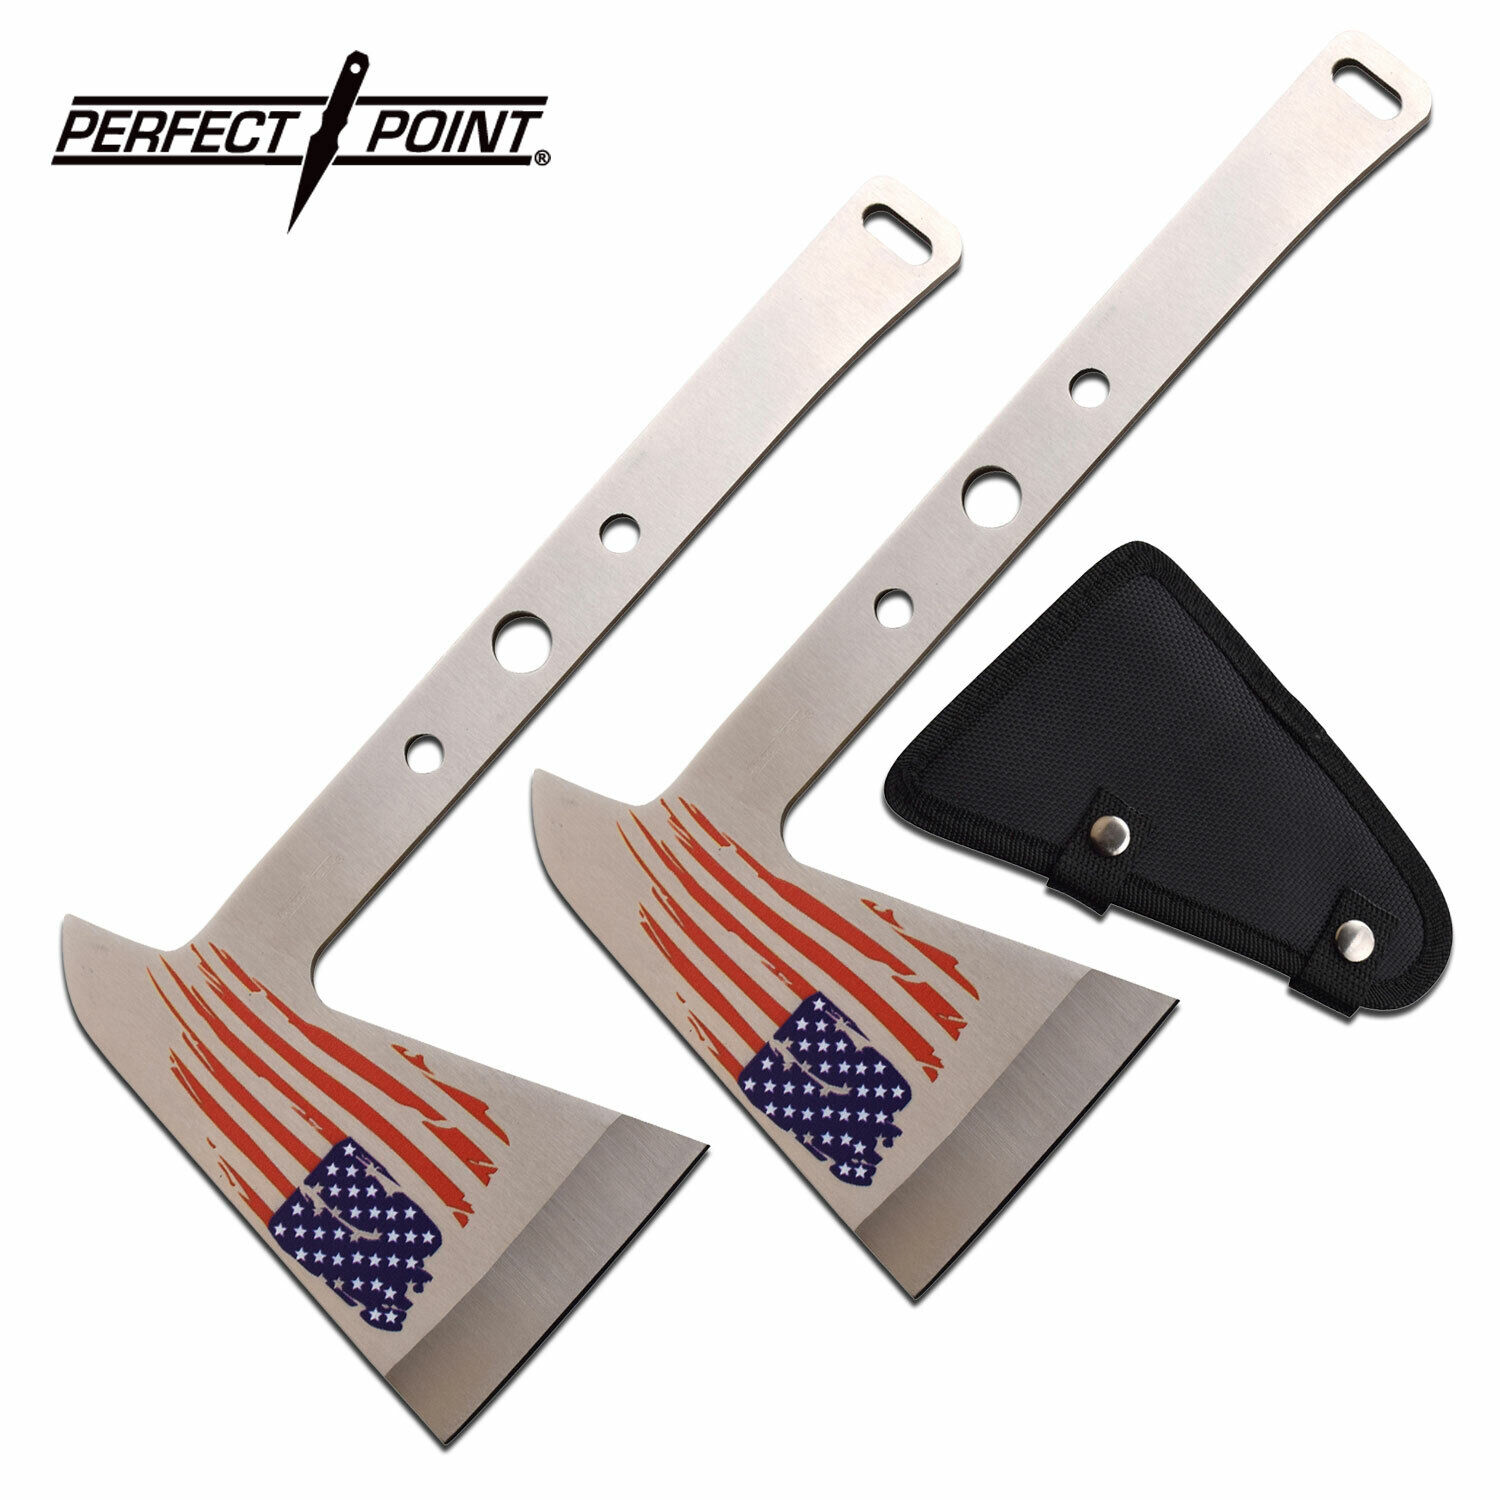 2 PC Perfect Point THROWING AXE SET w/ SHEATH TOMAHAWK FULL TANG PRINTED FLAG